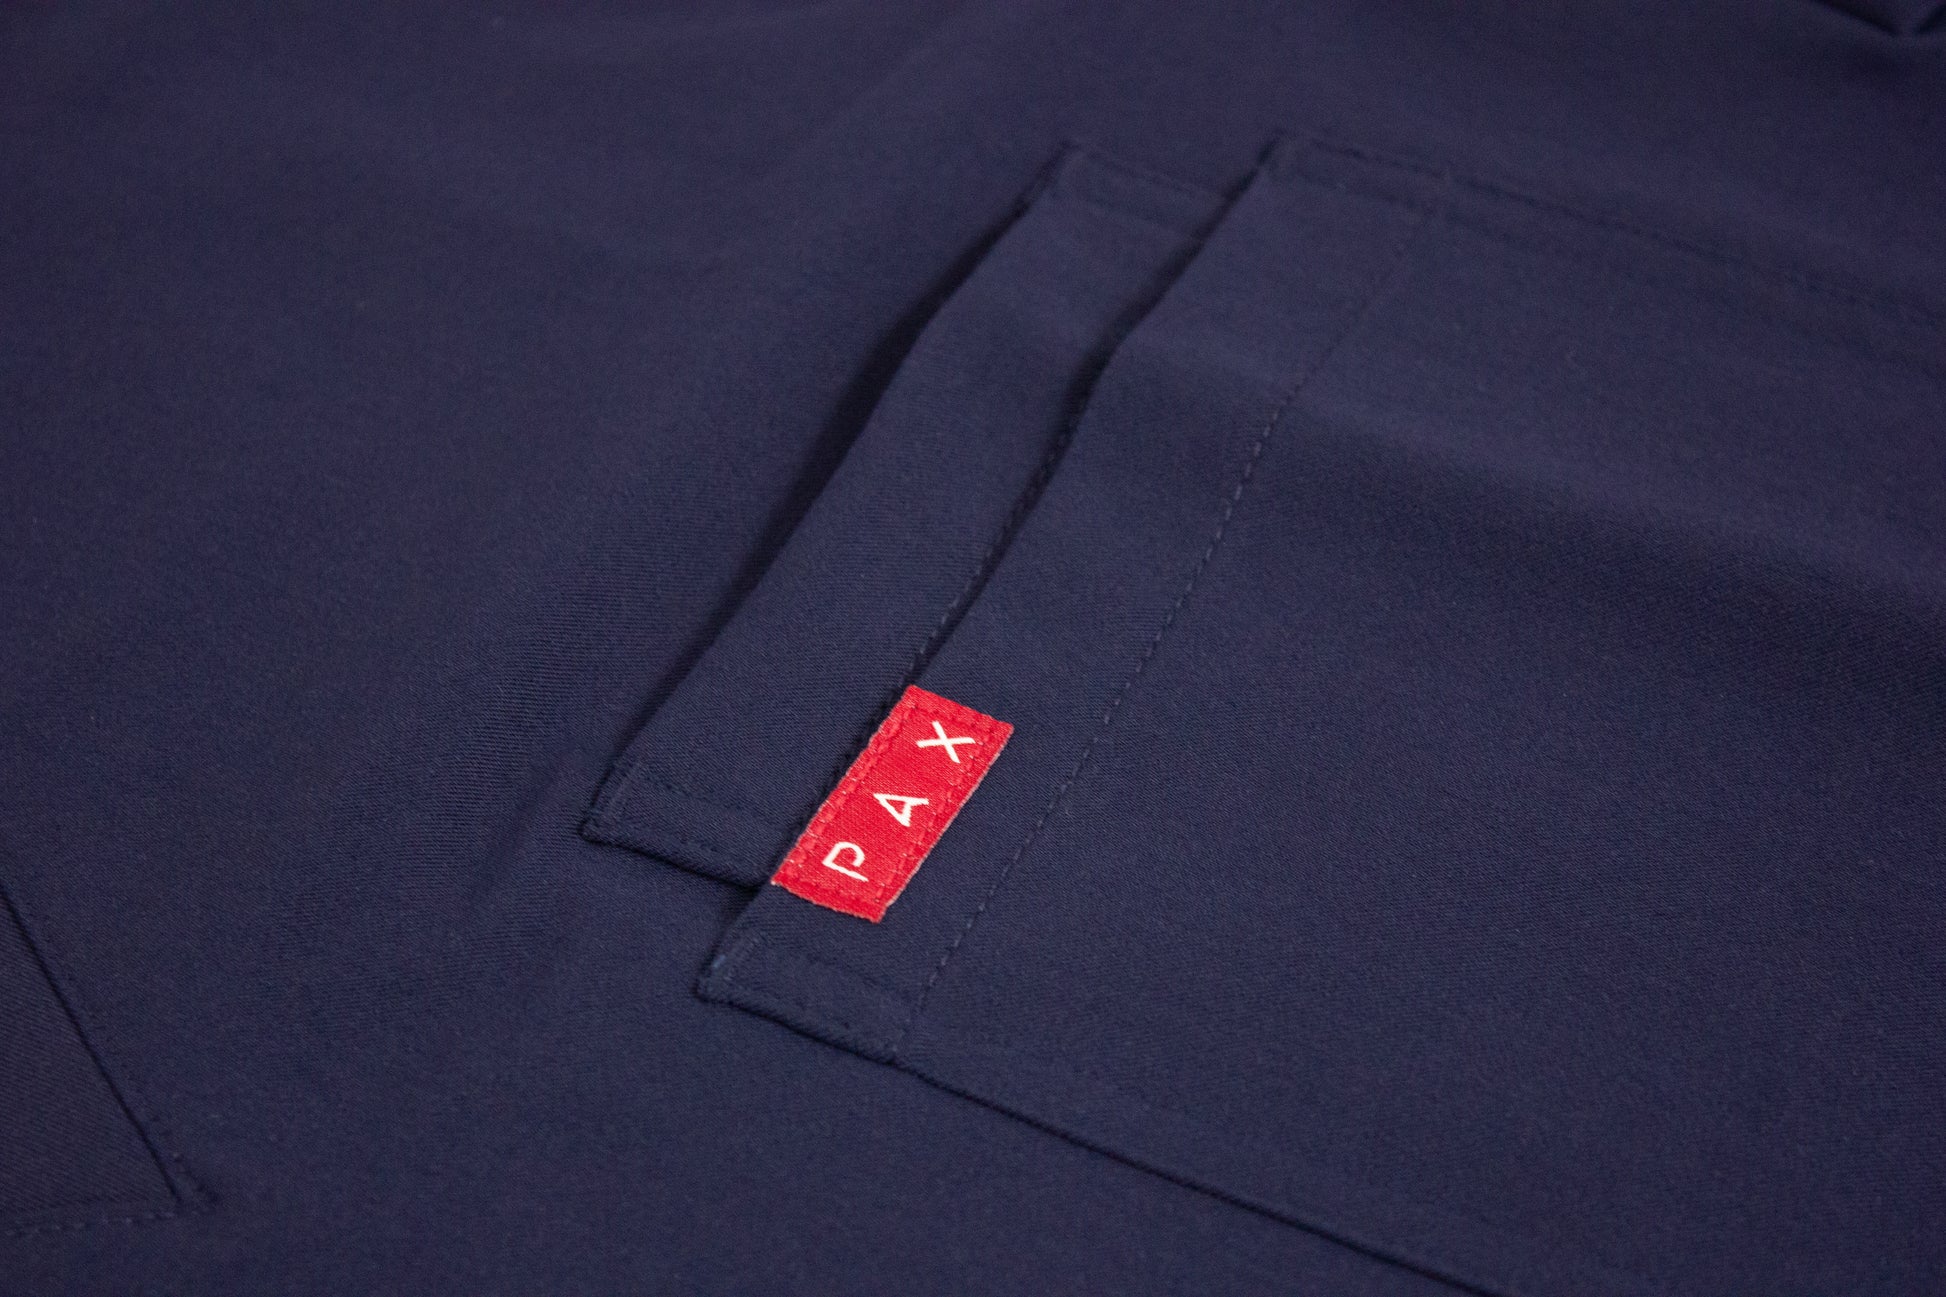 Detailed view of the PAX logo on the double breast pocket of a royal blue scrub top.